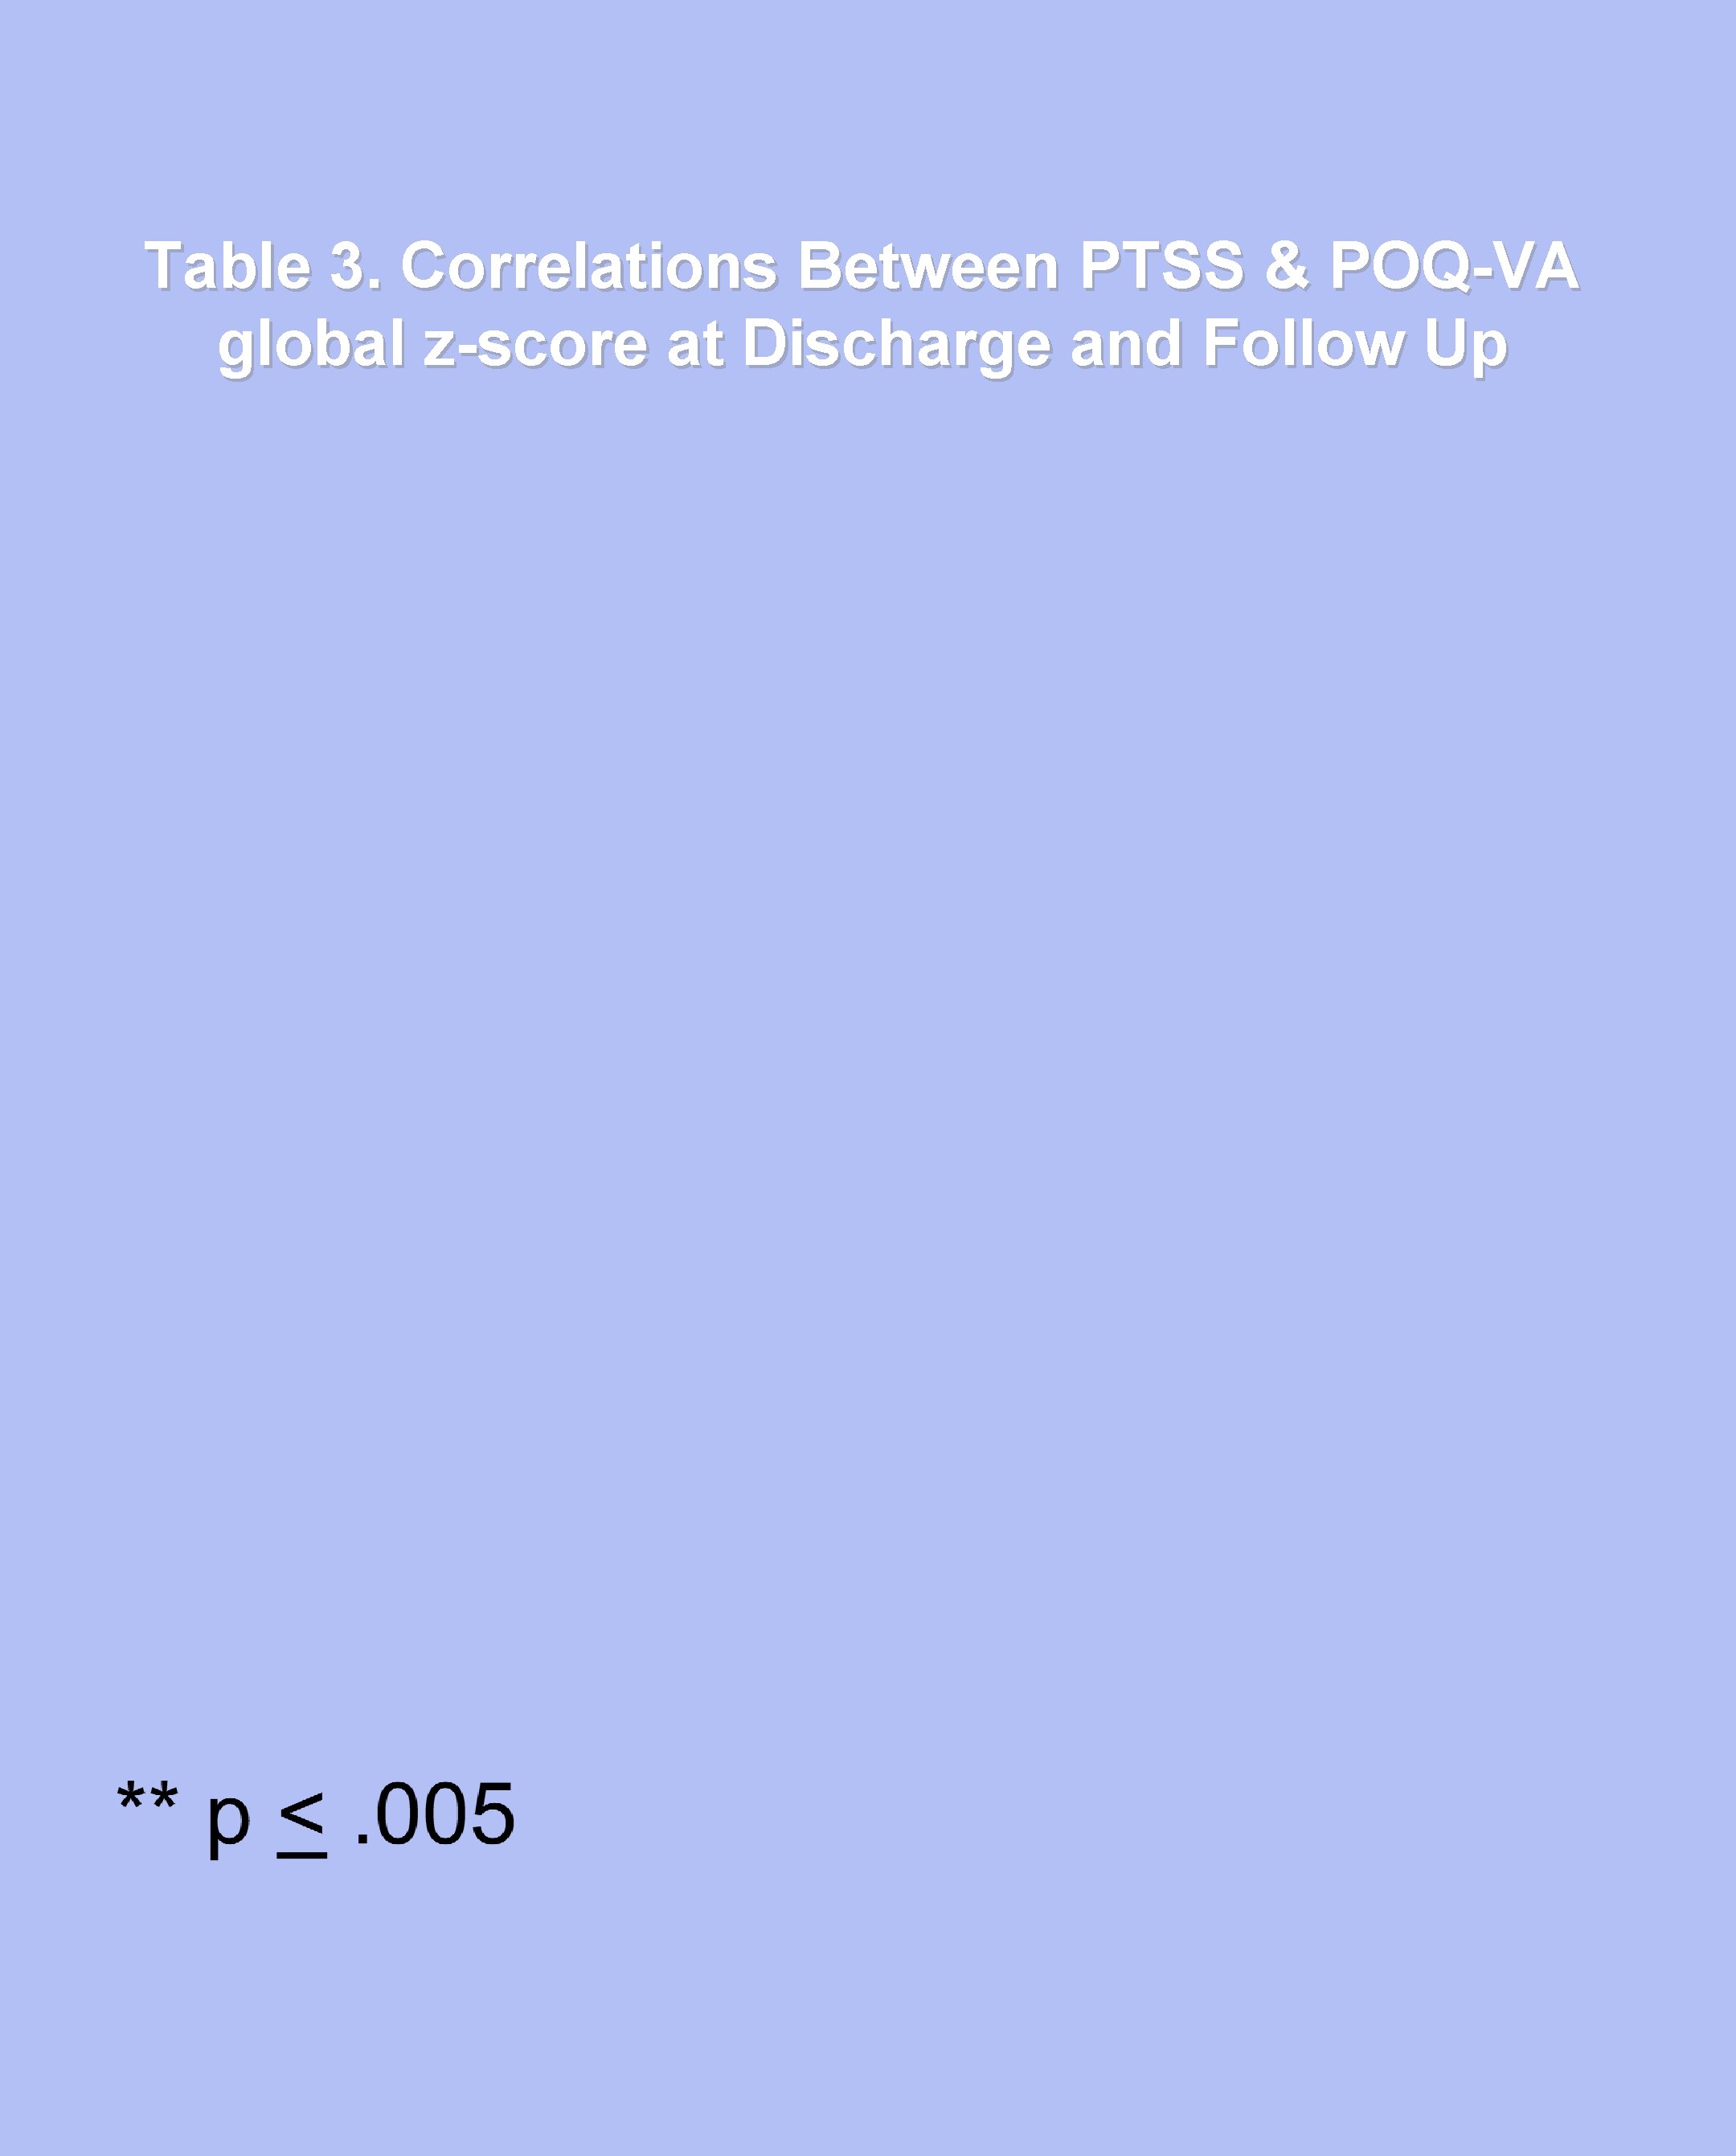 Table 3. Correlations Between PTSS & POQ-VA global z-score at Discharge and Follow Up